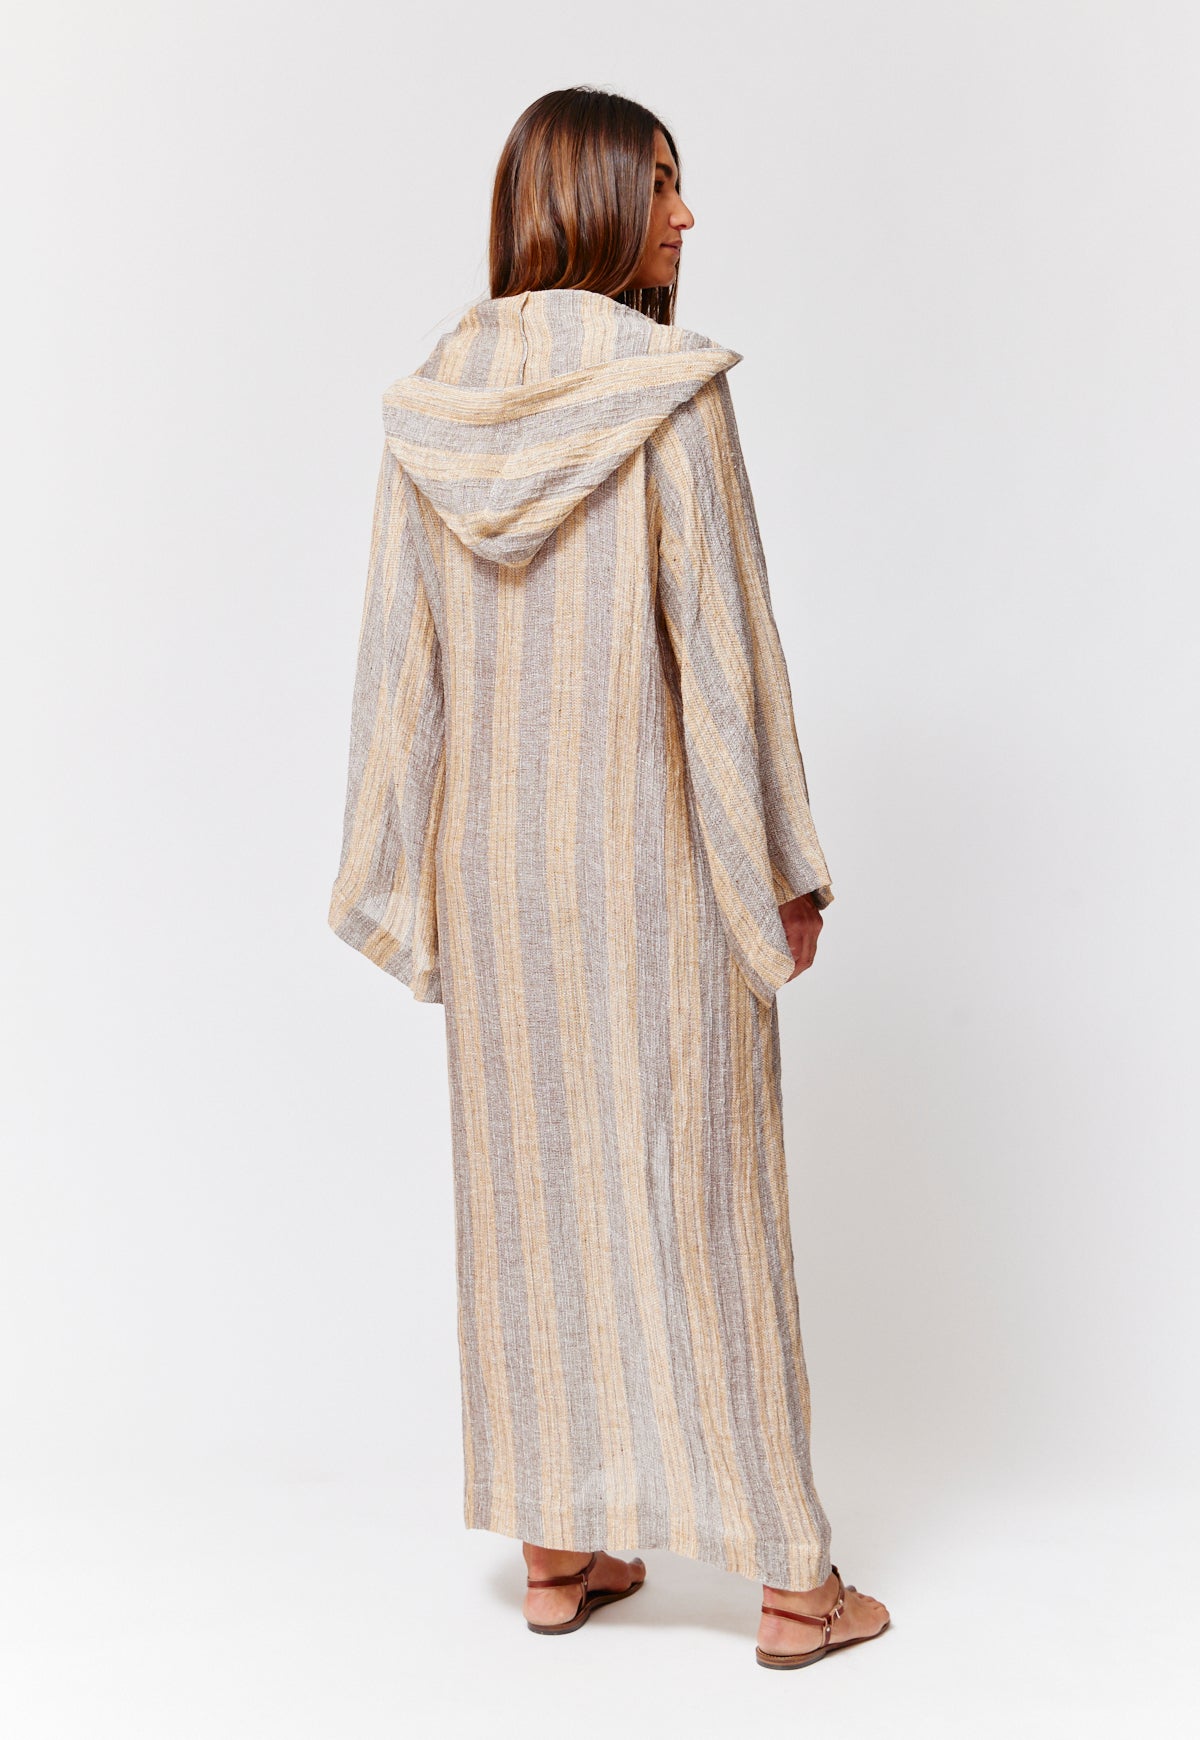 THE BEACH CAPE in SIENA & NATURAL STRIPED CHIOS GAUZE